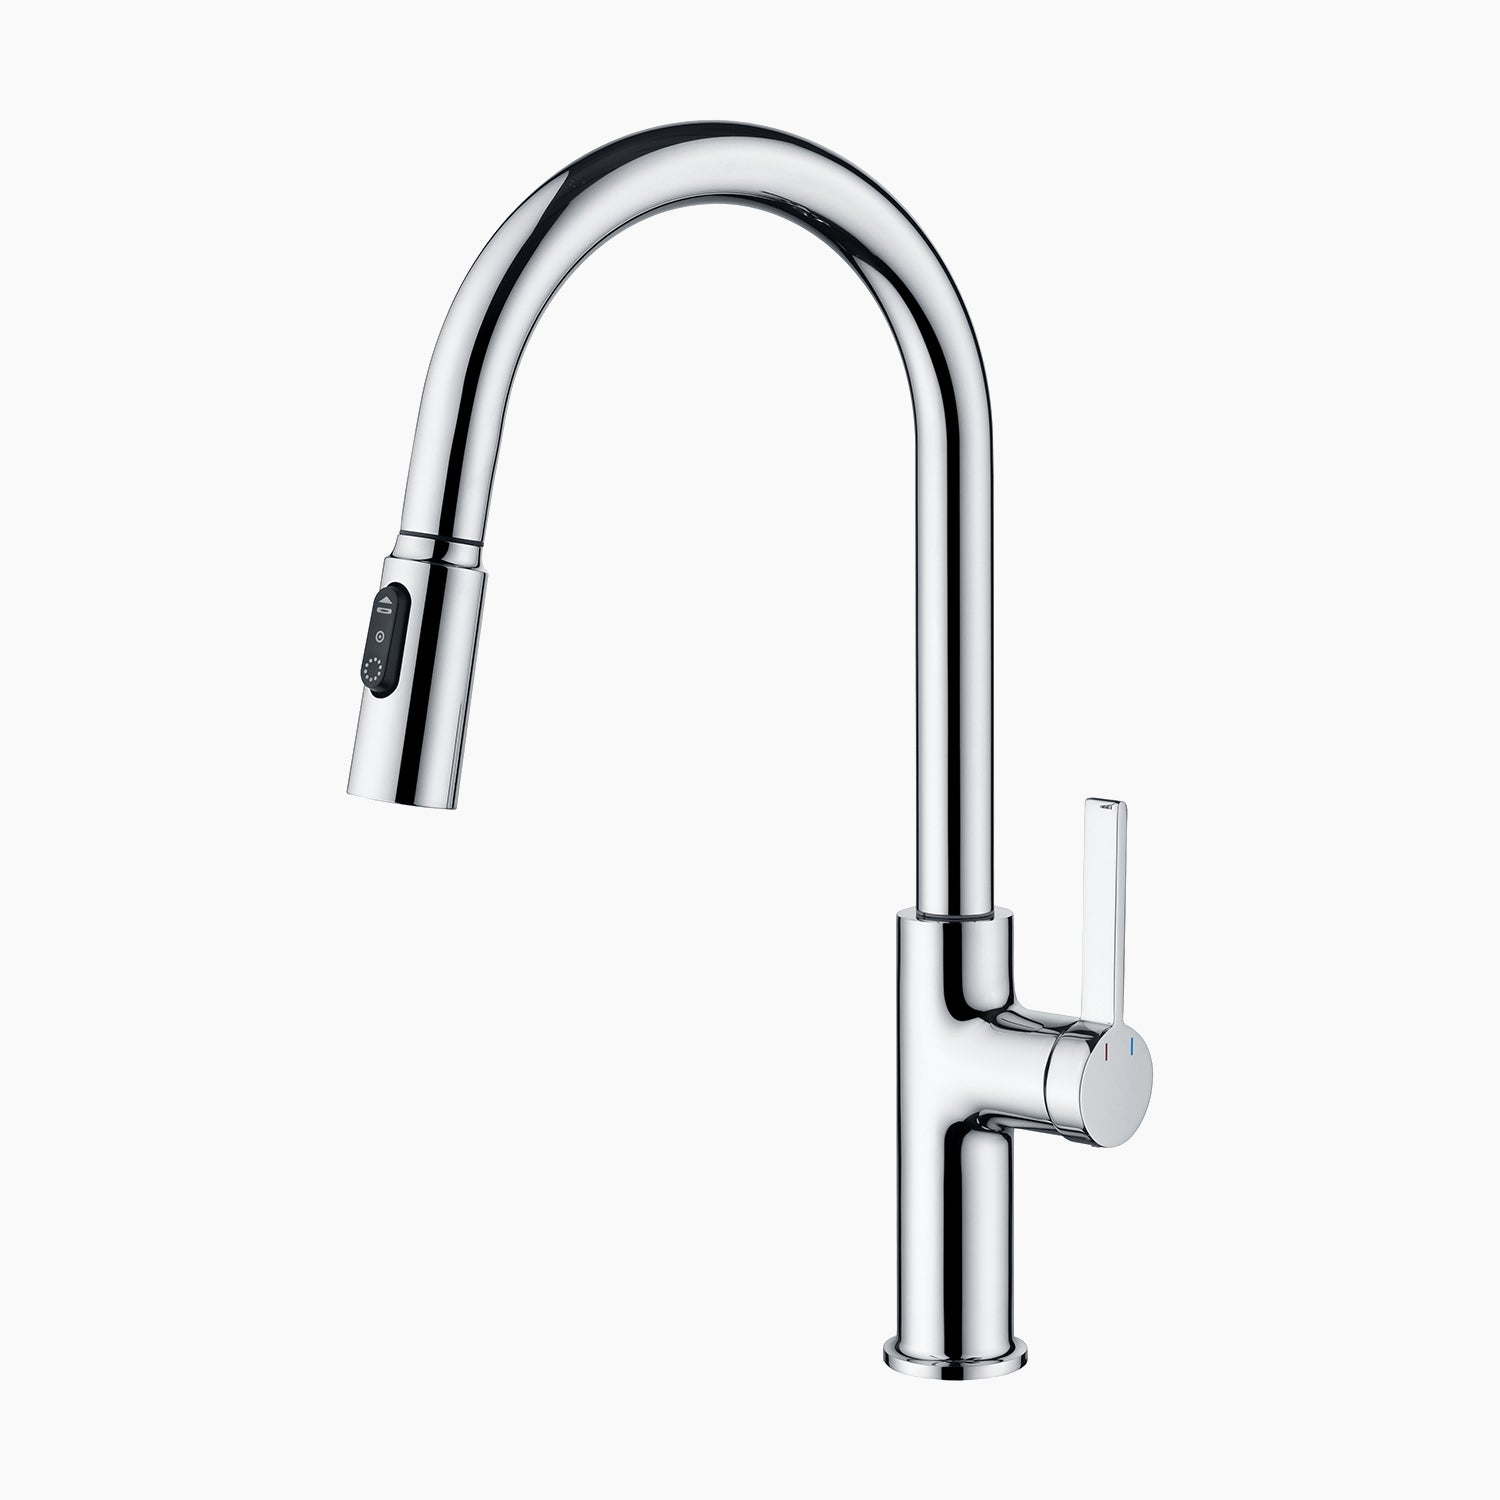 Lefton Copper Kitchen Pull-Down Faucet with 3 Water Outlet Modes-KF2202